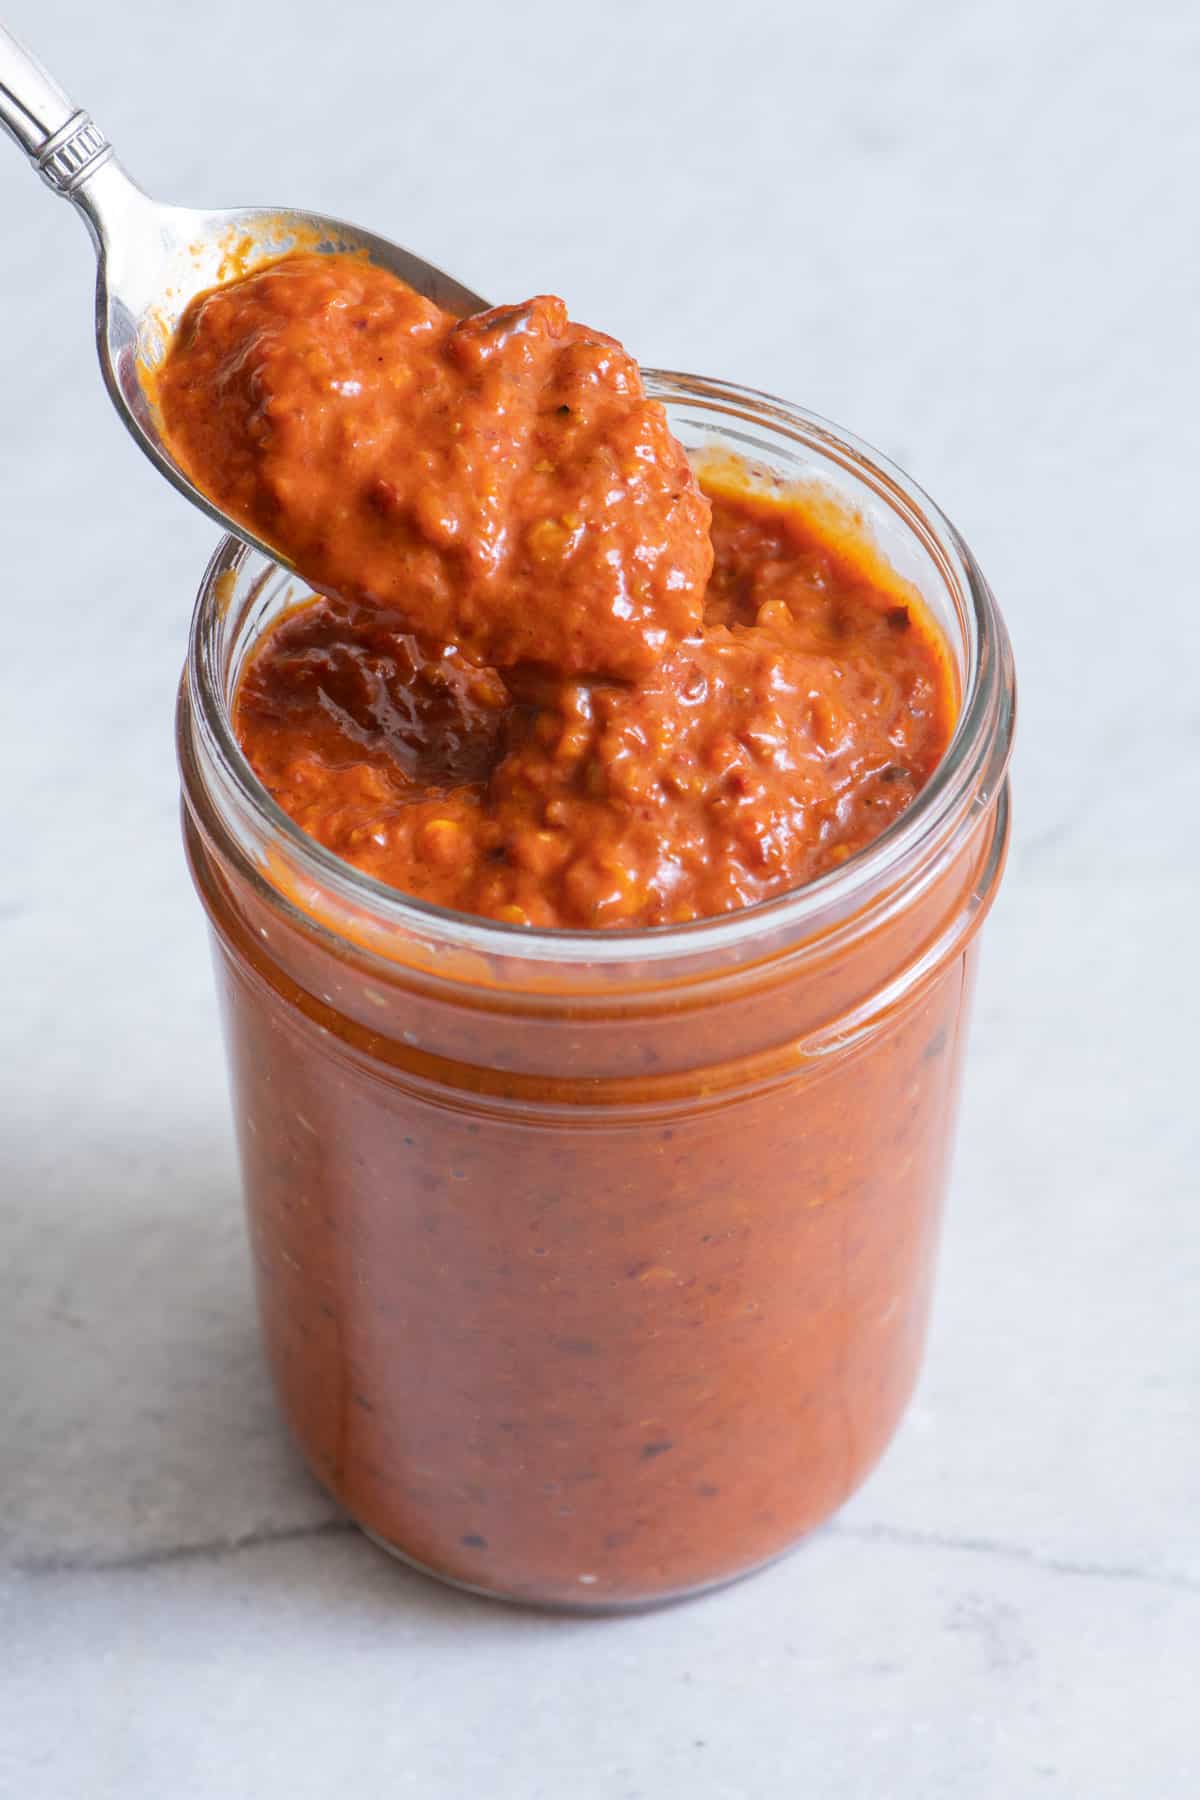 Harissa paste in glass jar with spoon scooping some up.